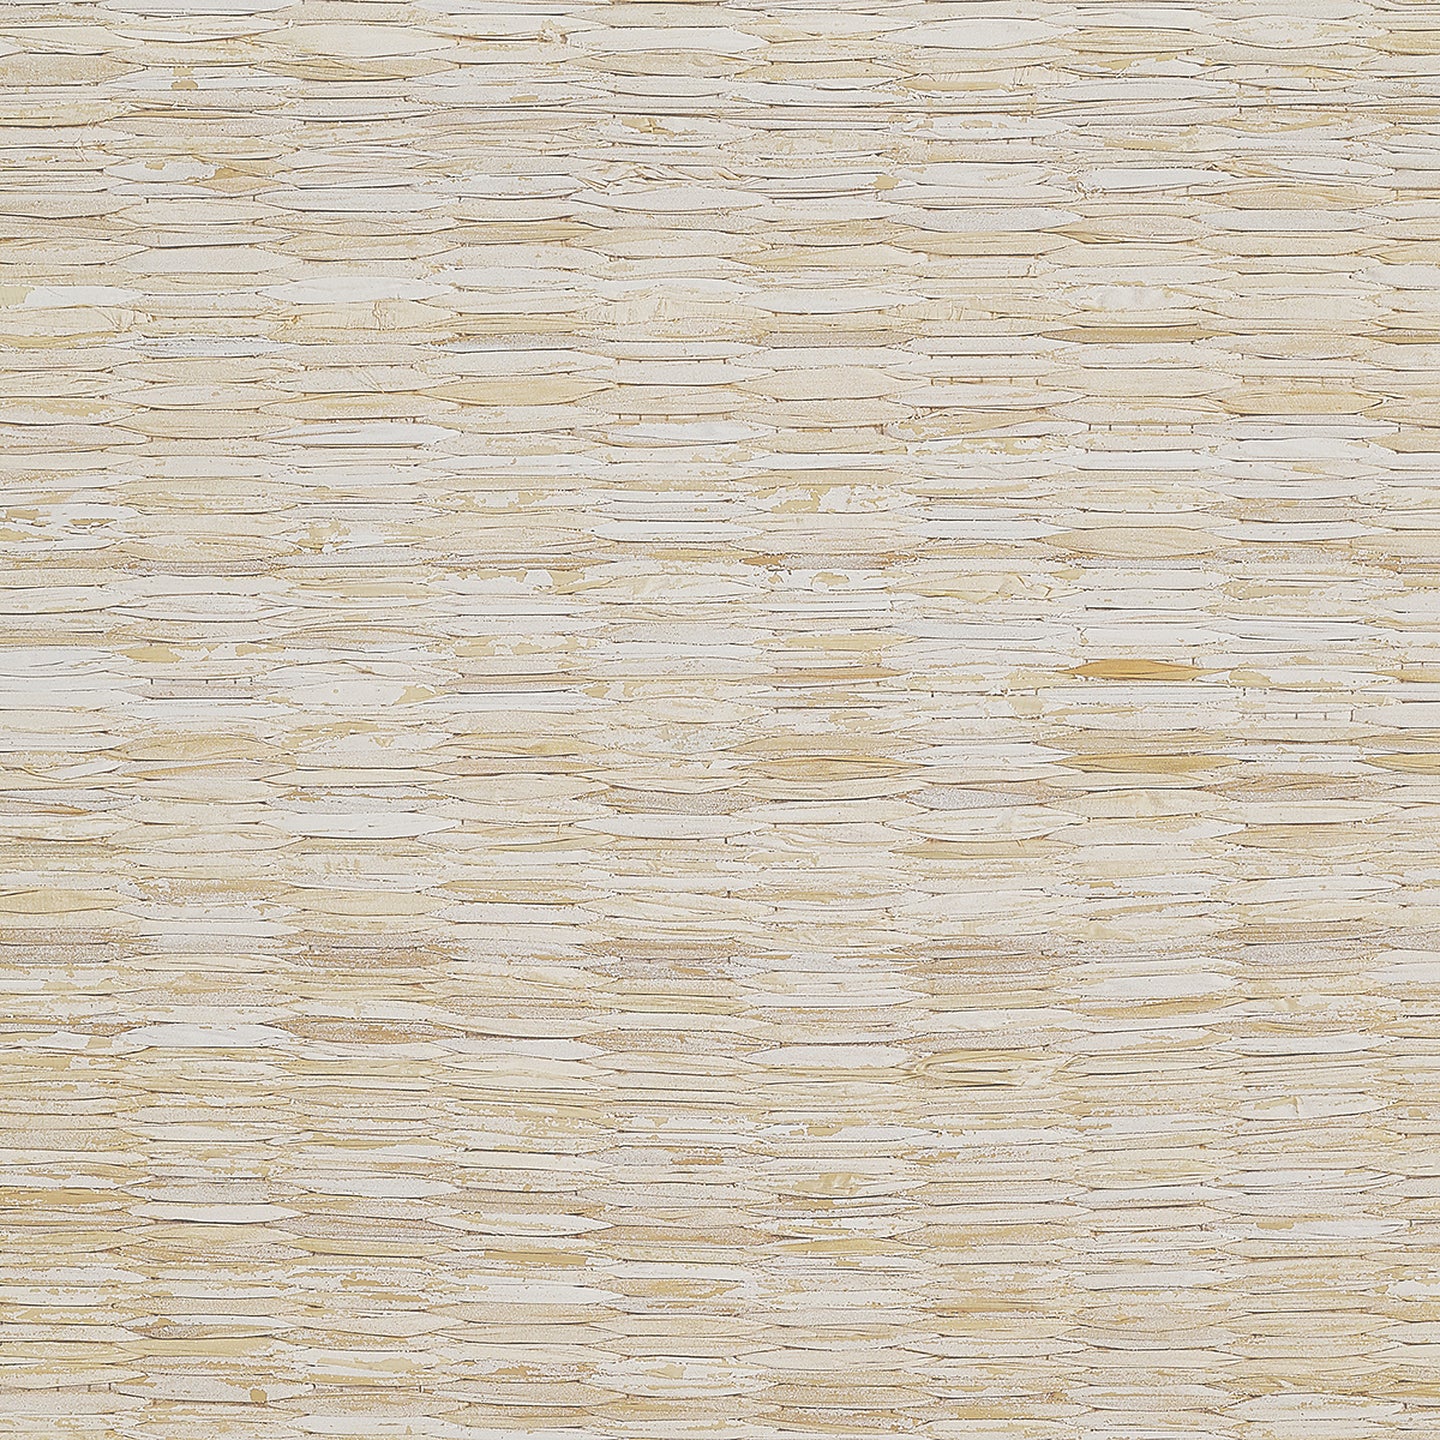 Purchase Phillip Jeffries Wallpaper - 10315, Thatched Raffia - Withy White 